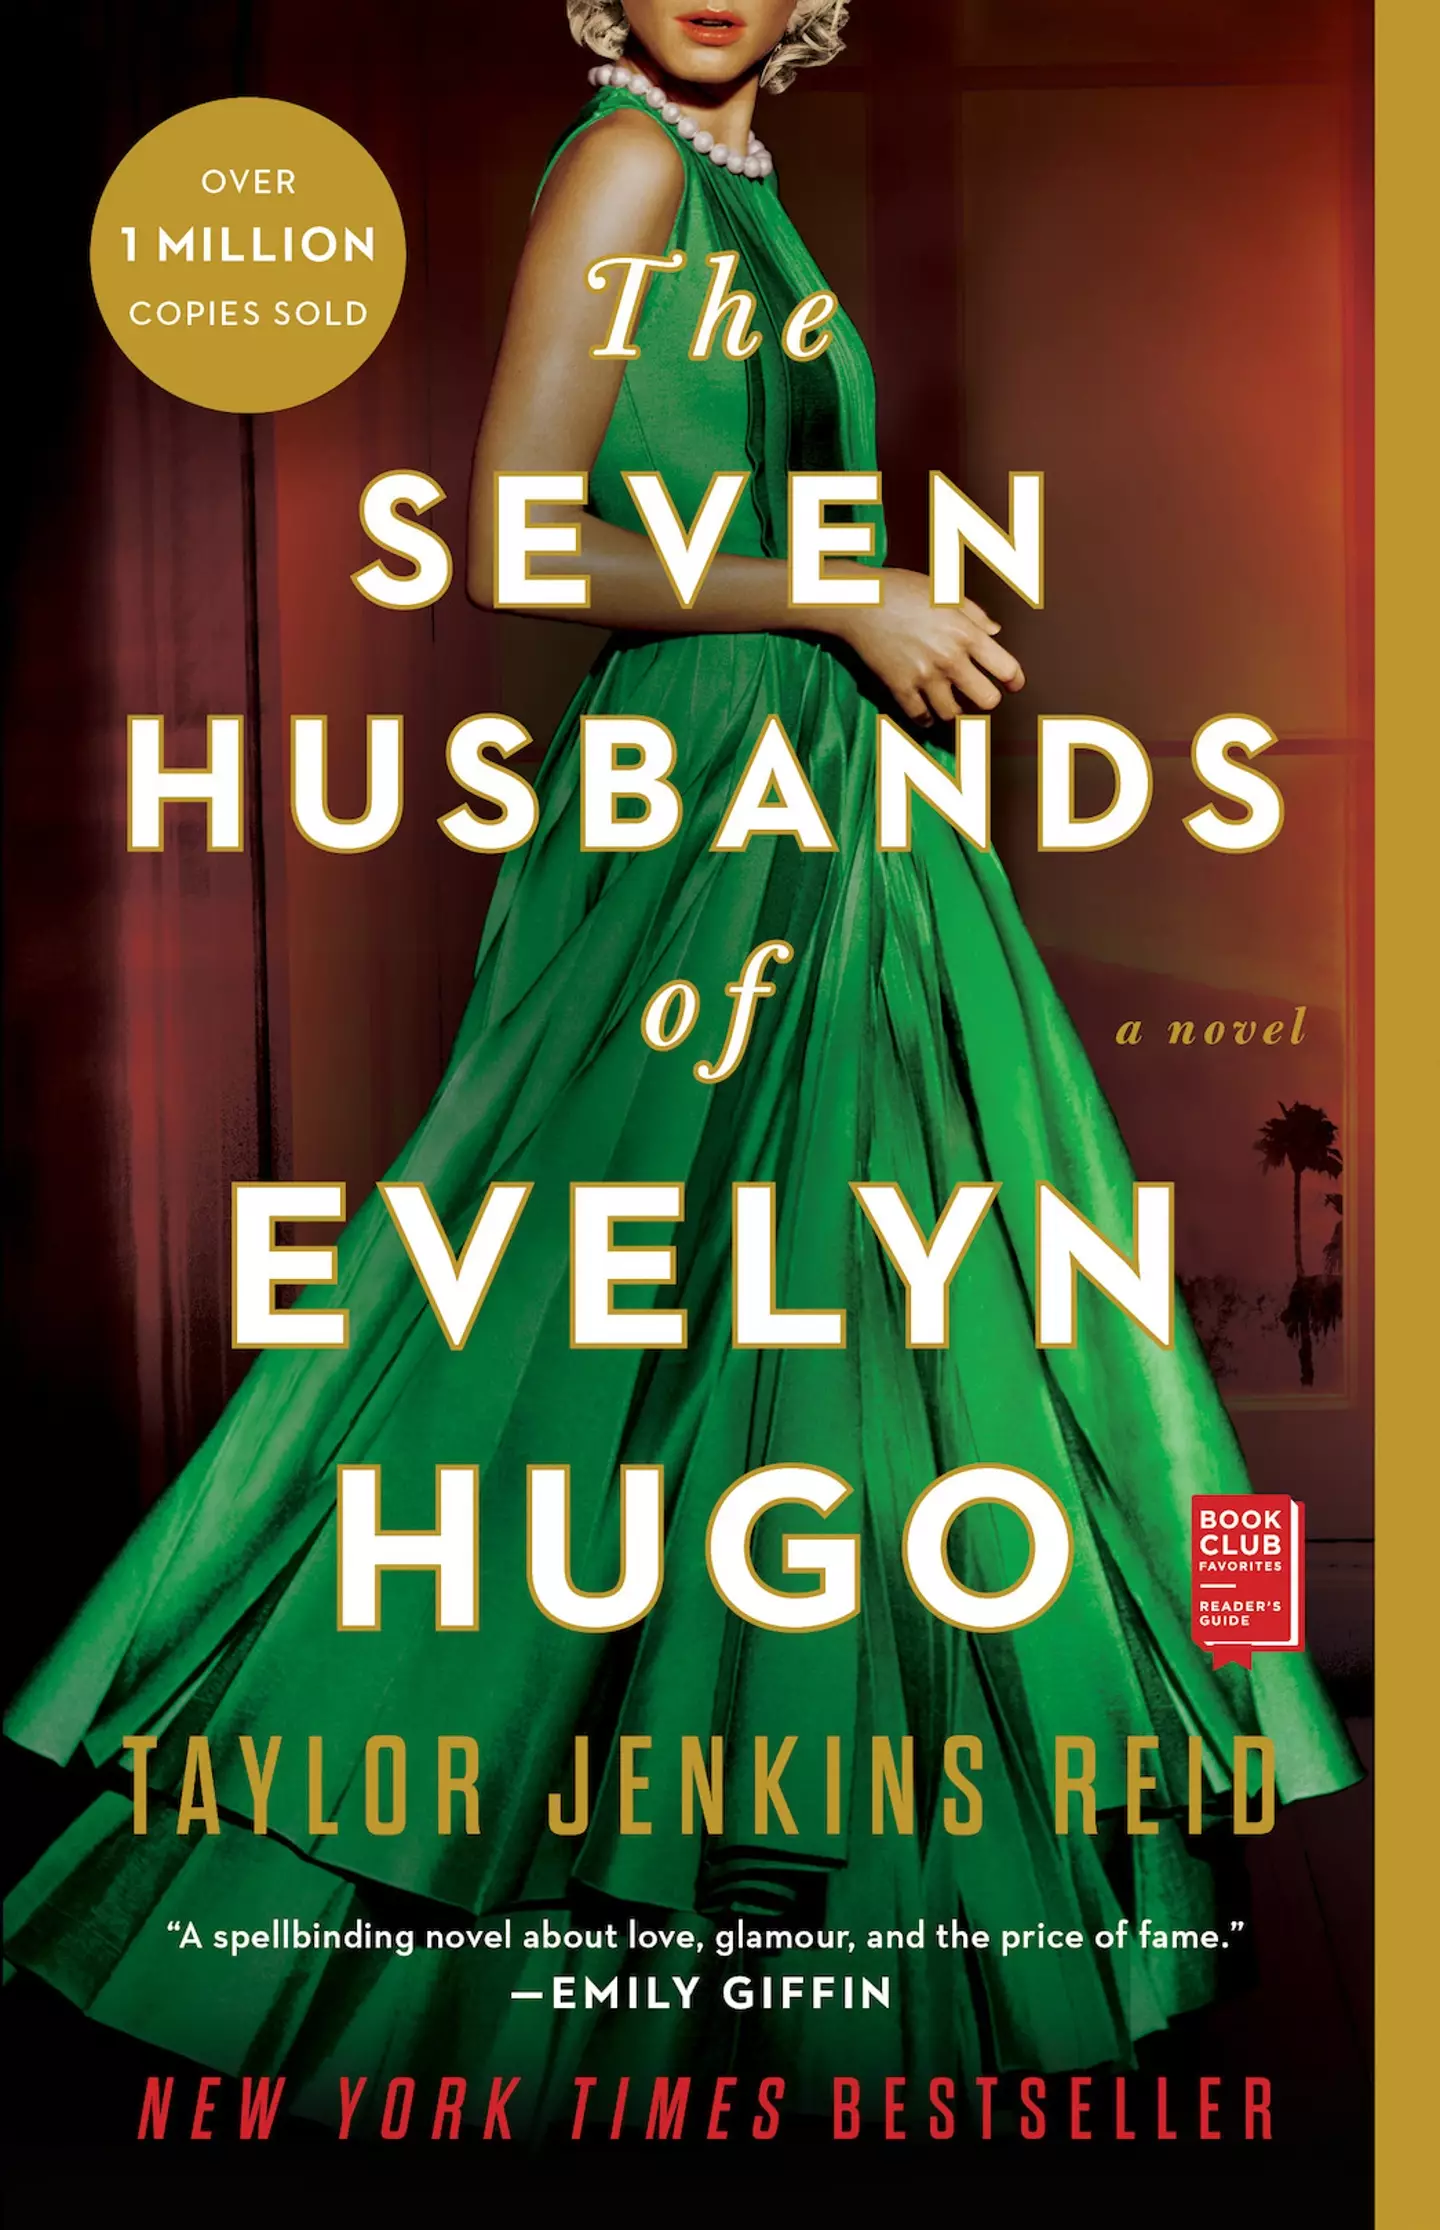 The Seven Husbands of Evelyn Hugo is getting ready to enter production.